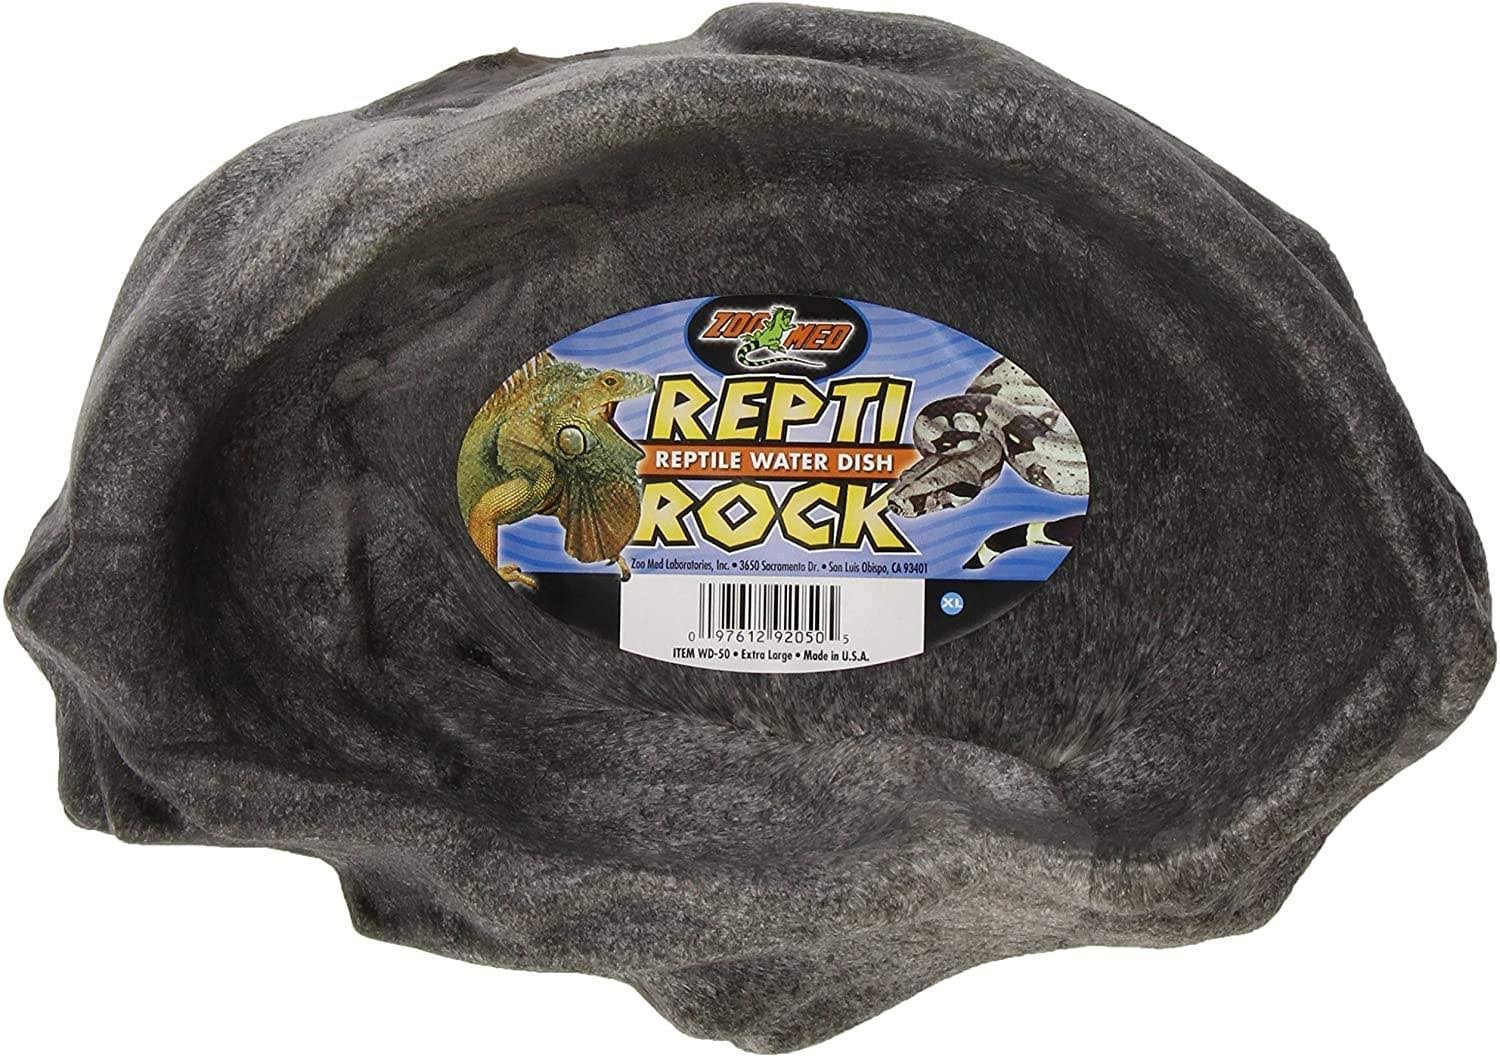 Zoo Med Reptile Rock Water Dish - X-Large